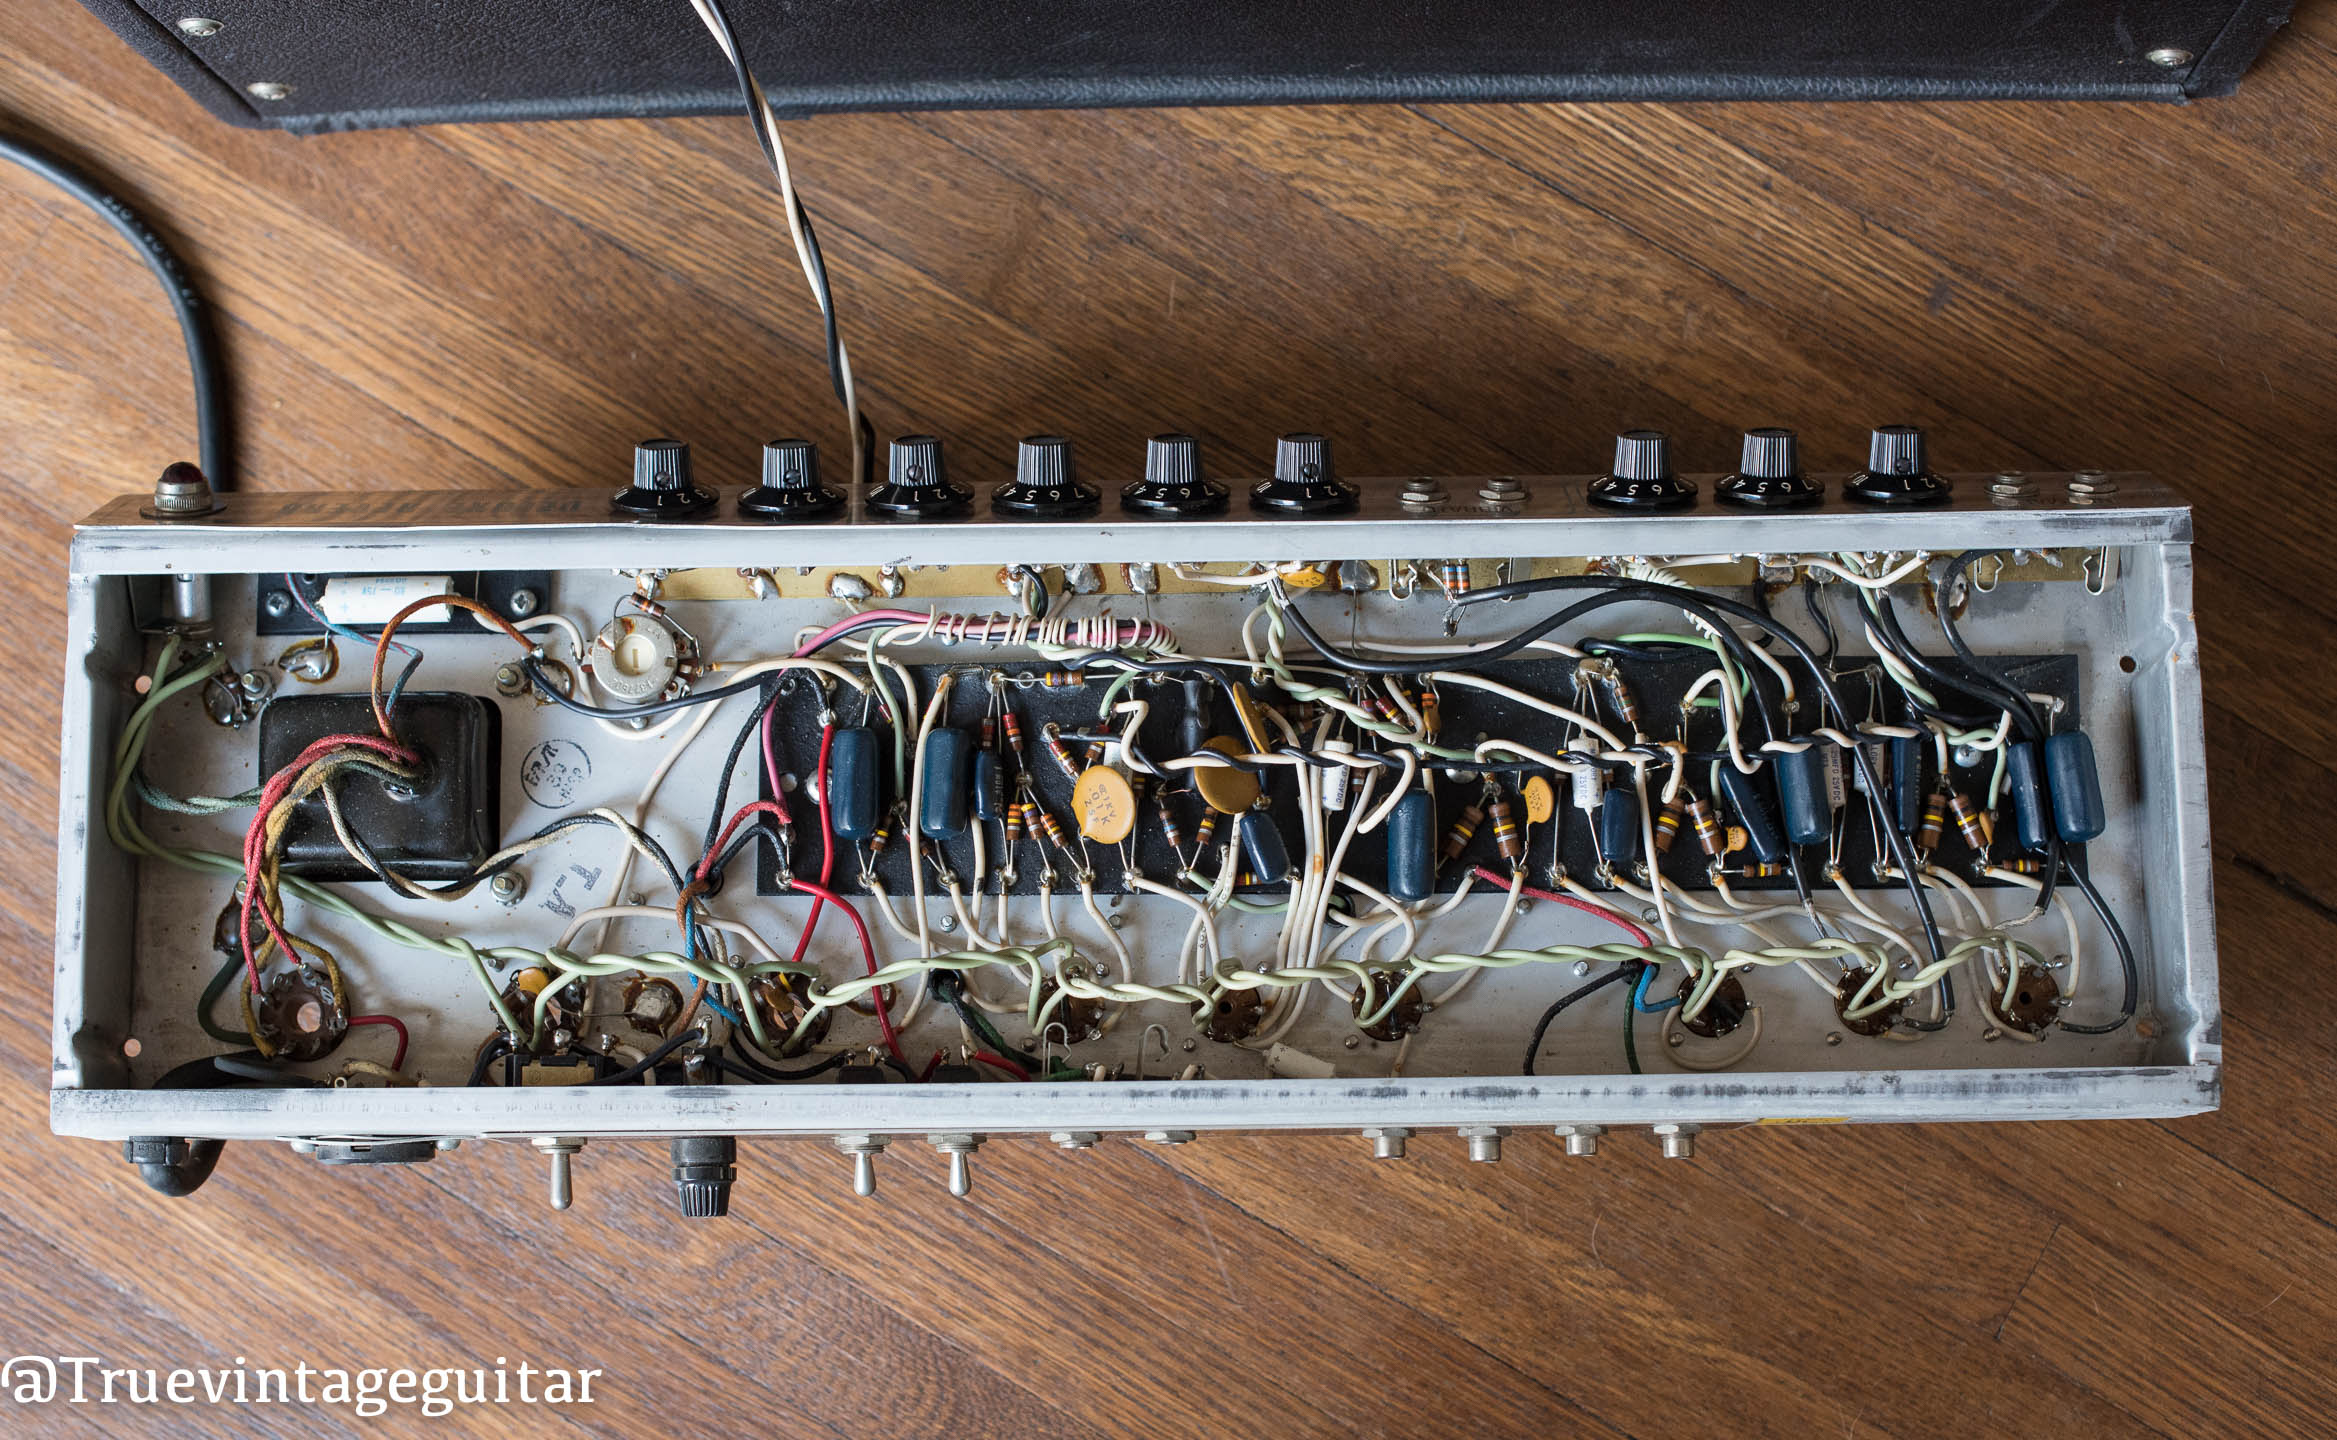 1976 Fender Deluxe Reverb chassis circuit